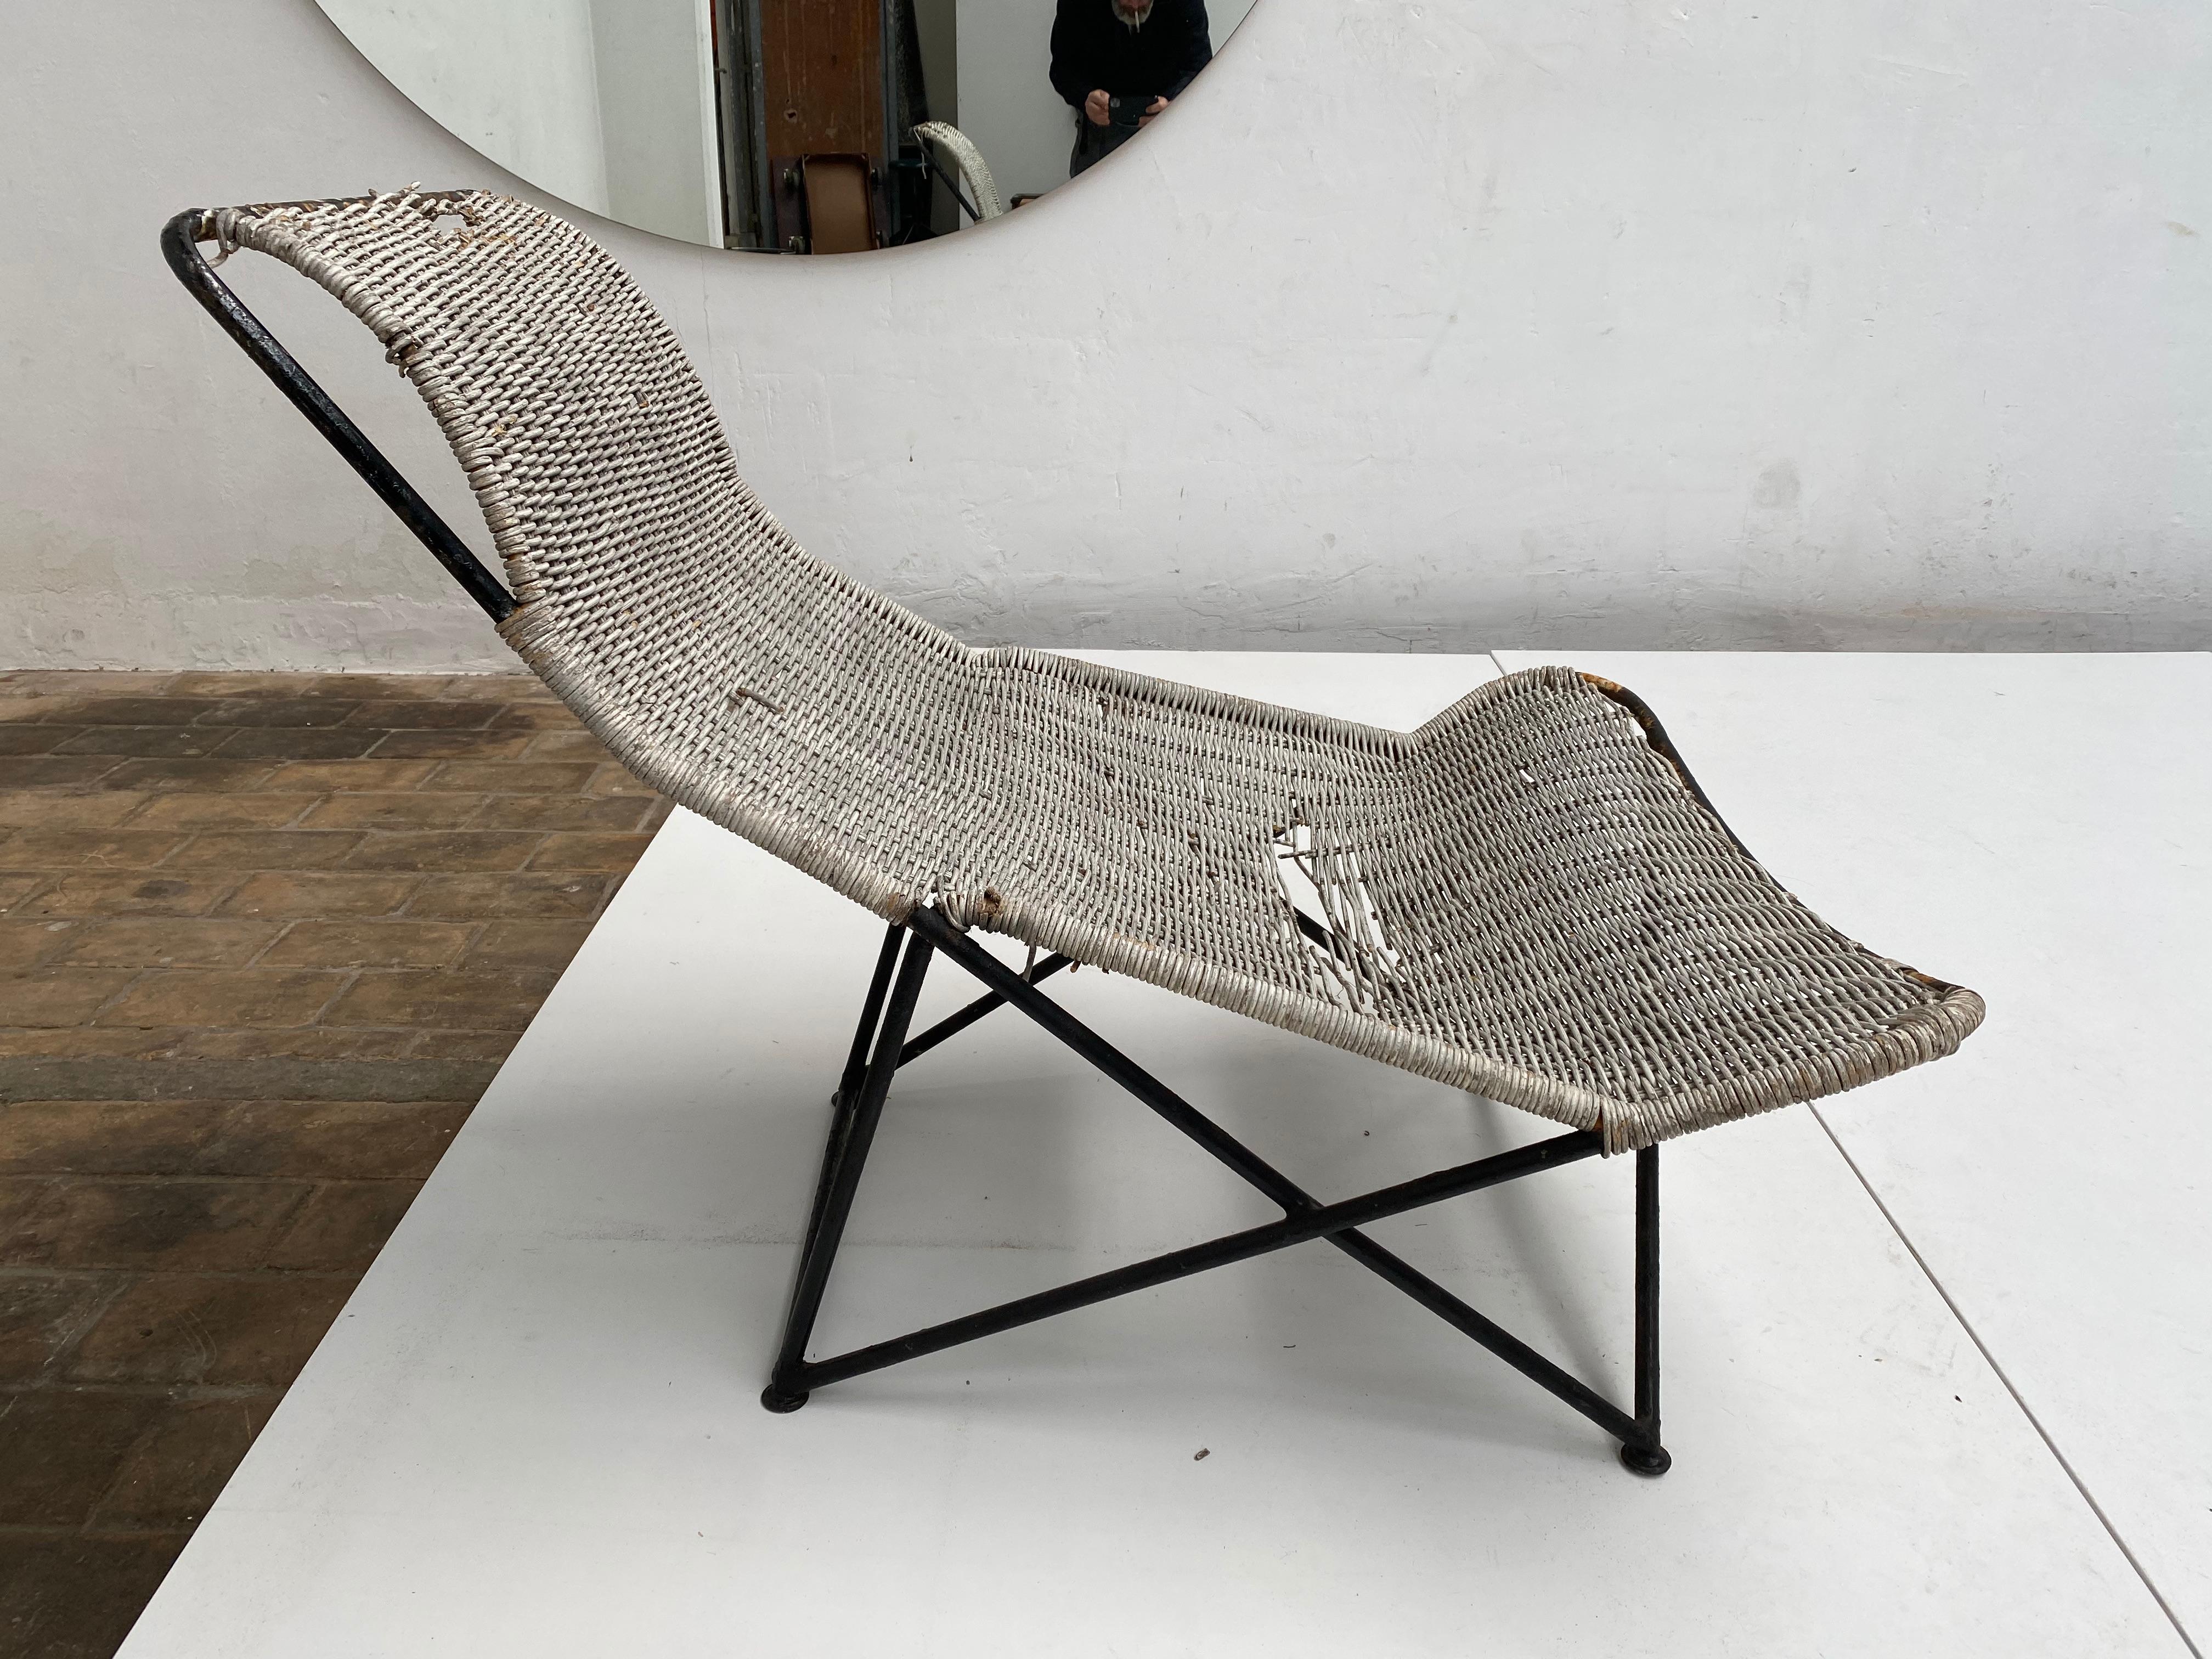 Stunning Sculptural Form Wicker Chaise Attributed to Raoul Guys, France, 1950's For Sale 10